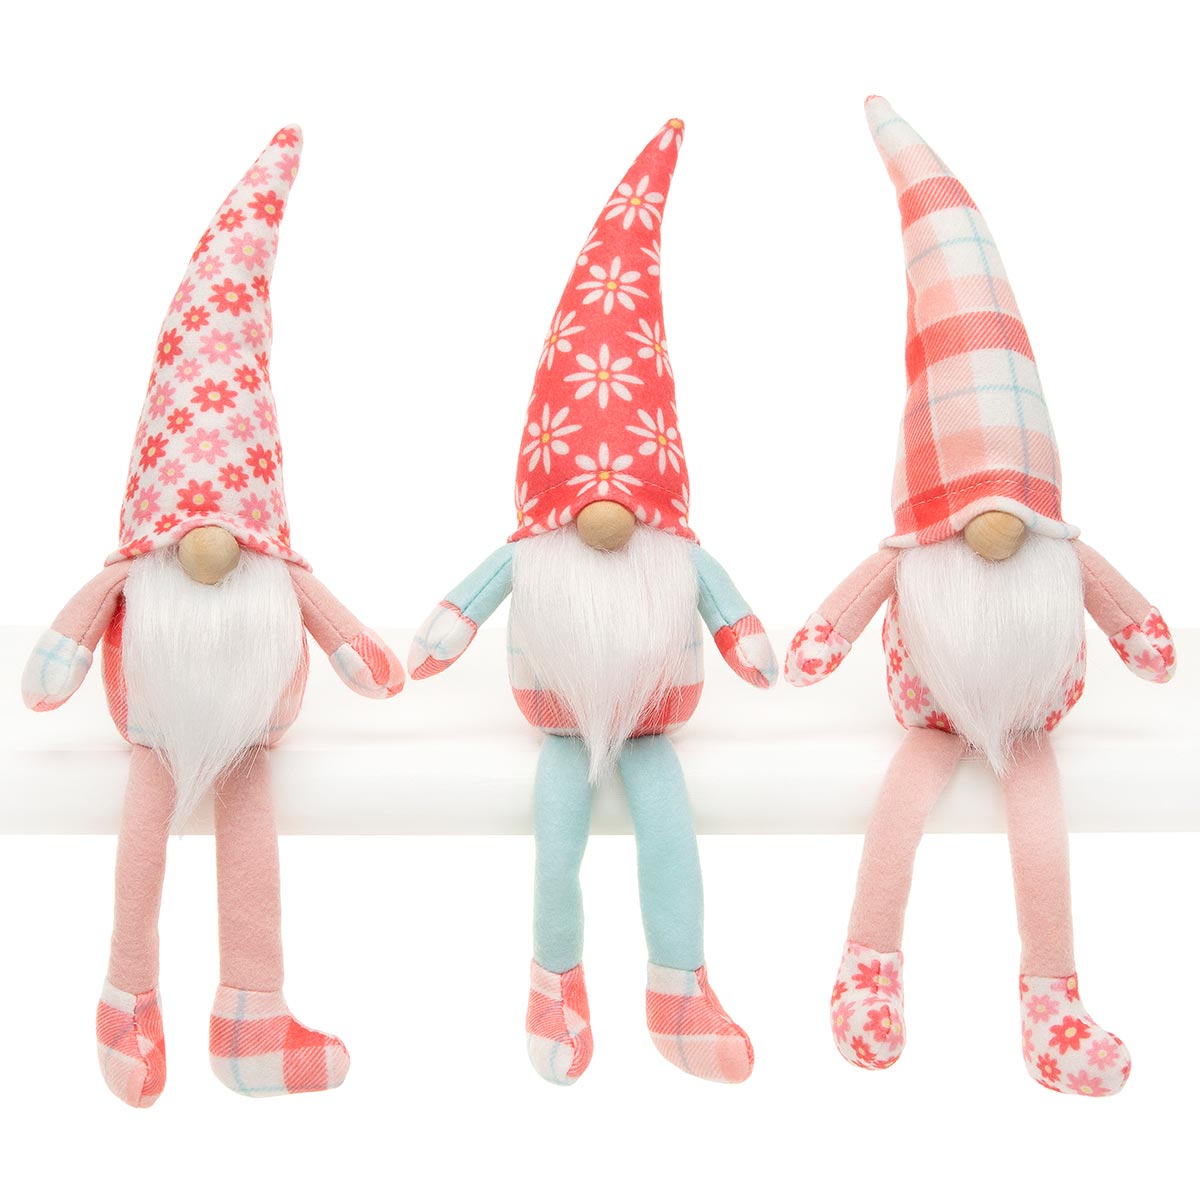 CORAL FAIR GNOMECORAL//WHITE/BLUE WITH WIRED HAT,